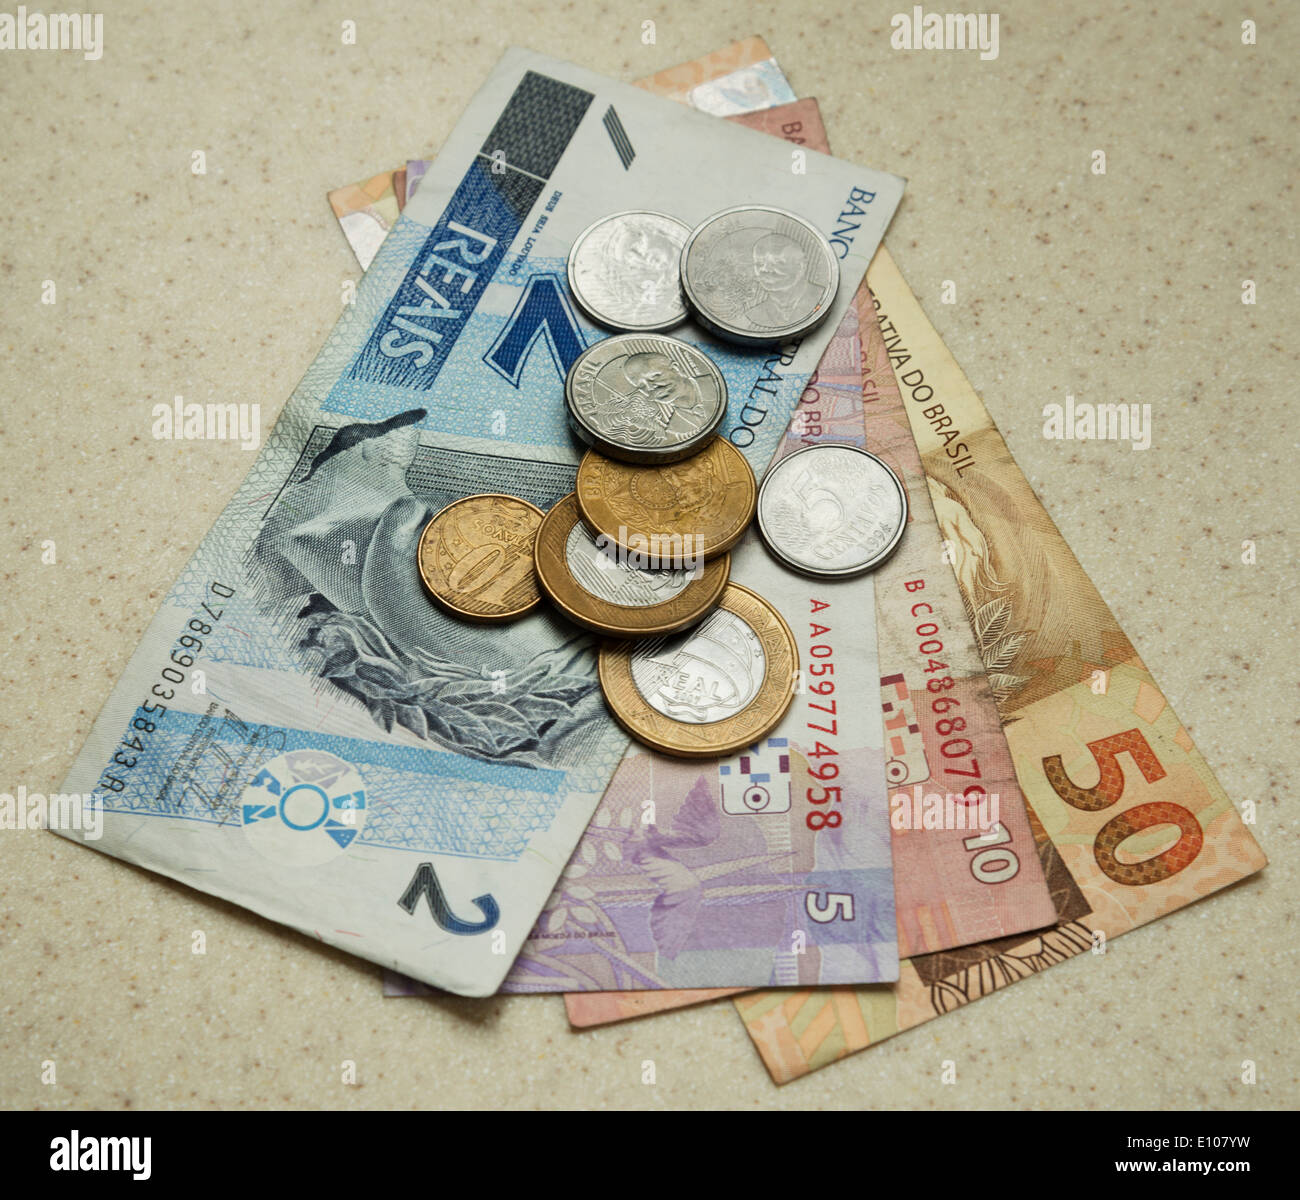 Brazilian Reals. Currency of Brazil. Money, notes and coinage. Stock Photo